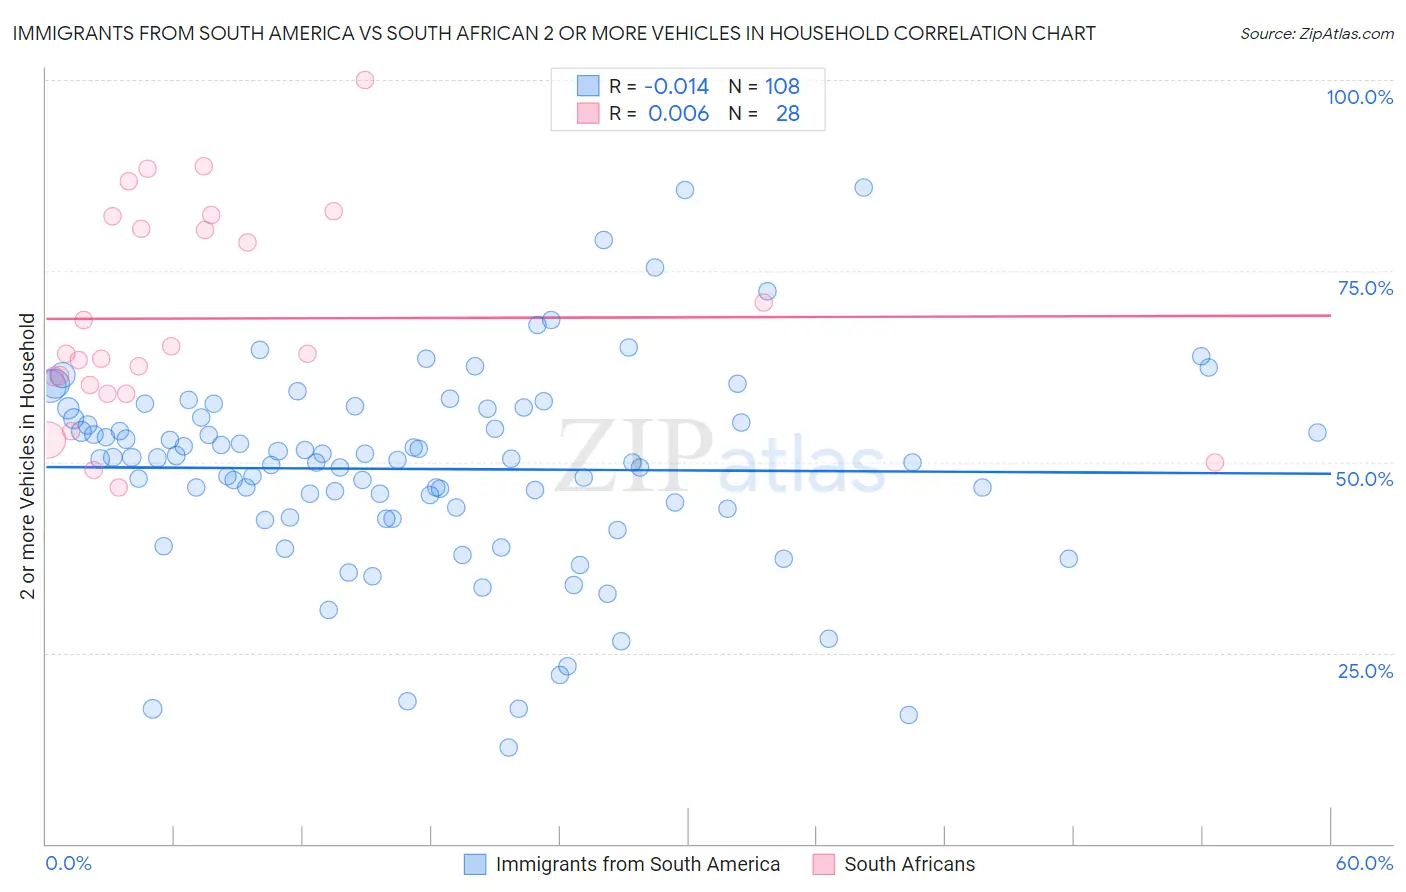 Immigrants from South America vs South African 2 or more Vehicles in Household